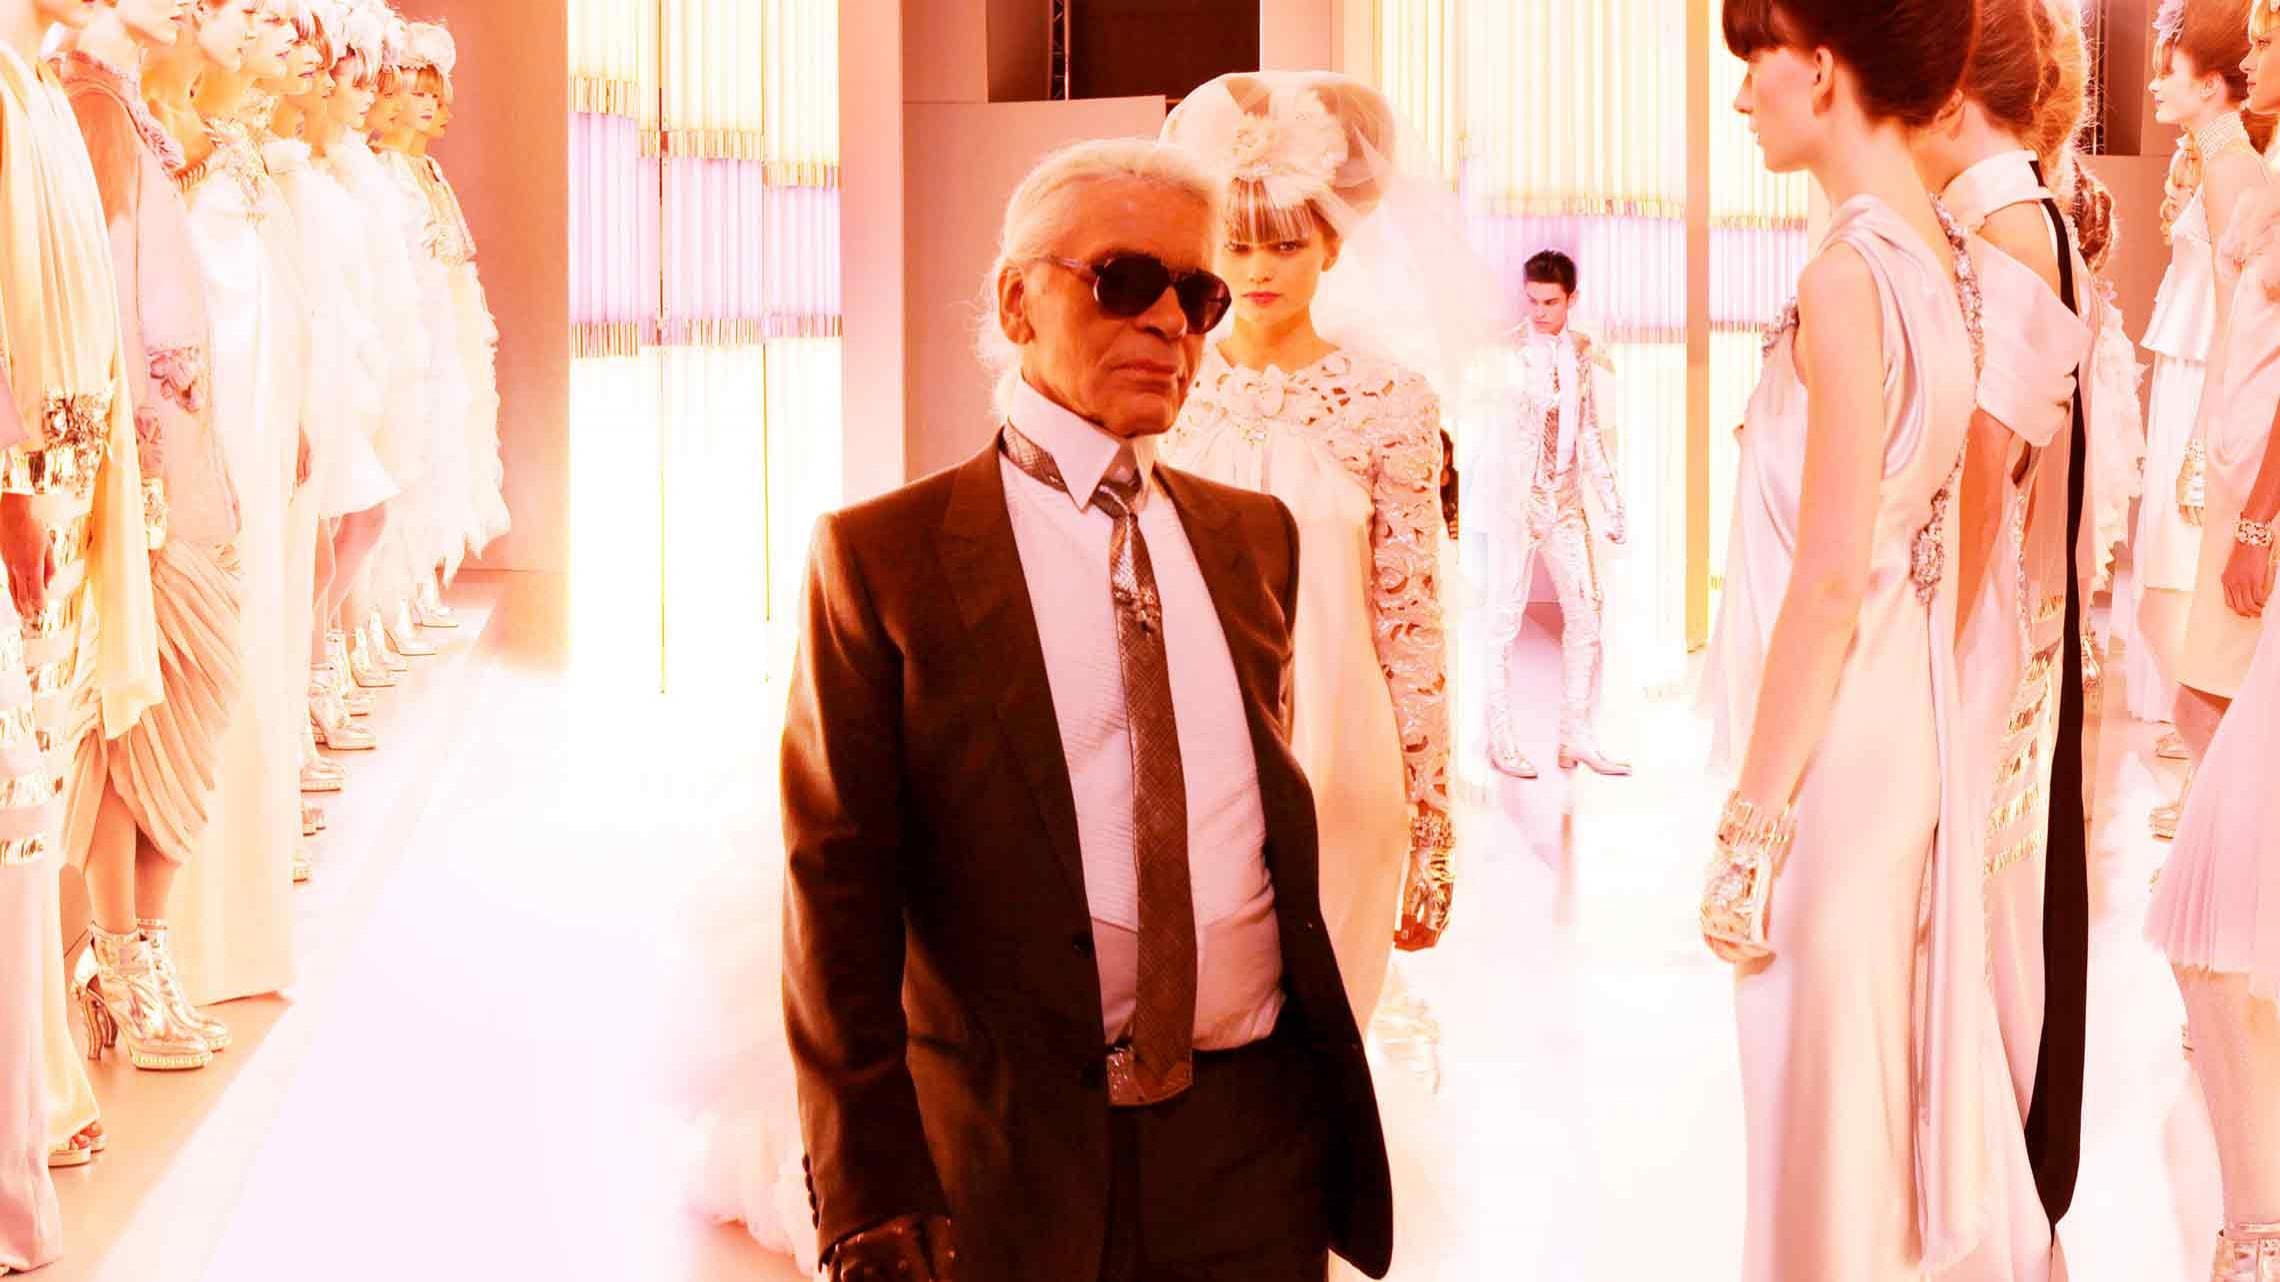 Karl Lagerfeld and Chanel will be the subject of a new Netflix series